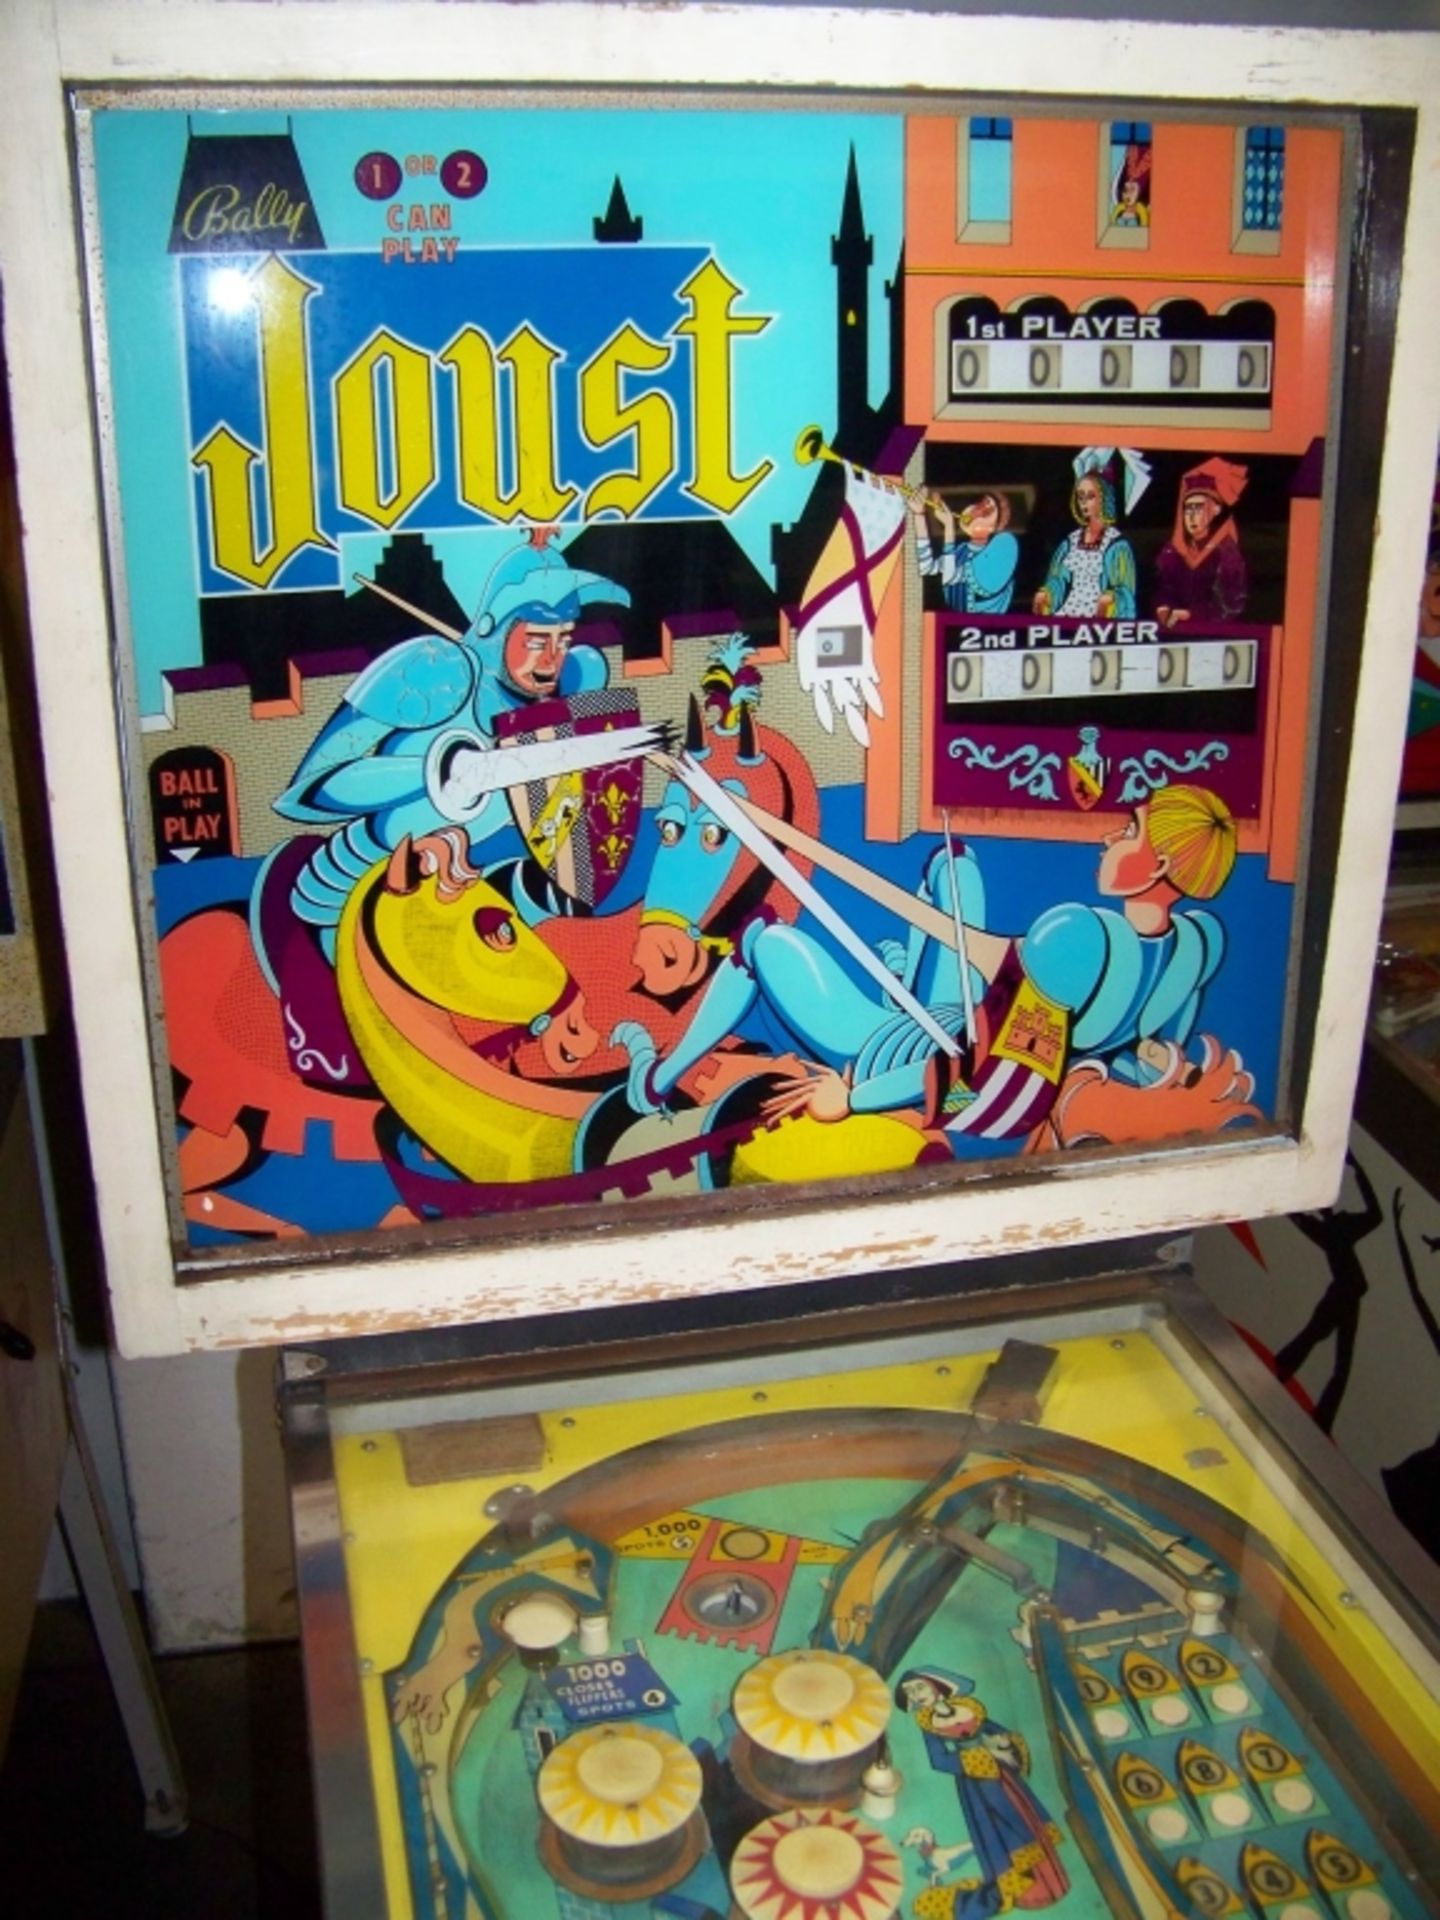 JOUST CLASSIC PINBALL MACHINE BALLY 1969 Item is in used condition. Evidence of wear and - Image 4 of 6